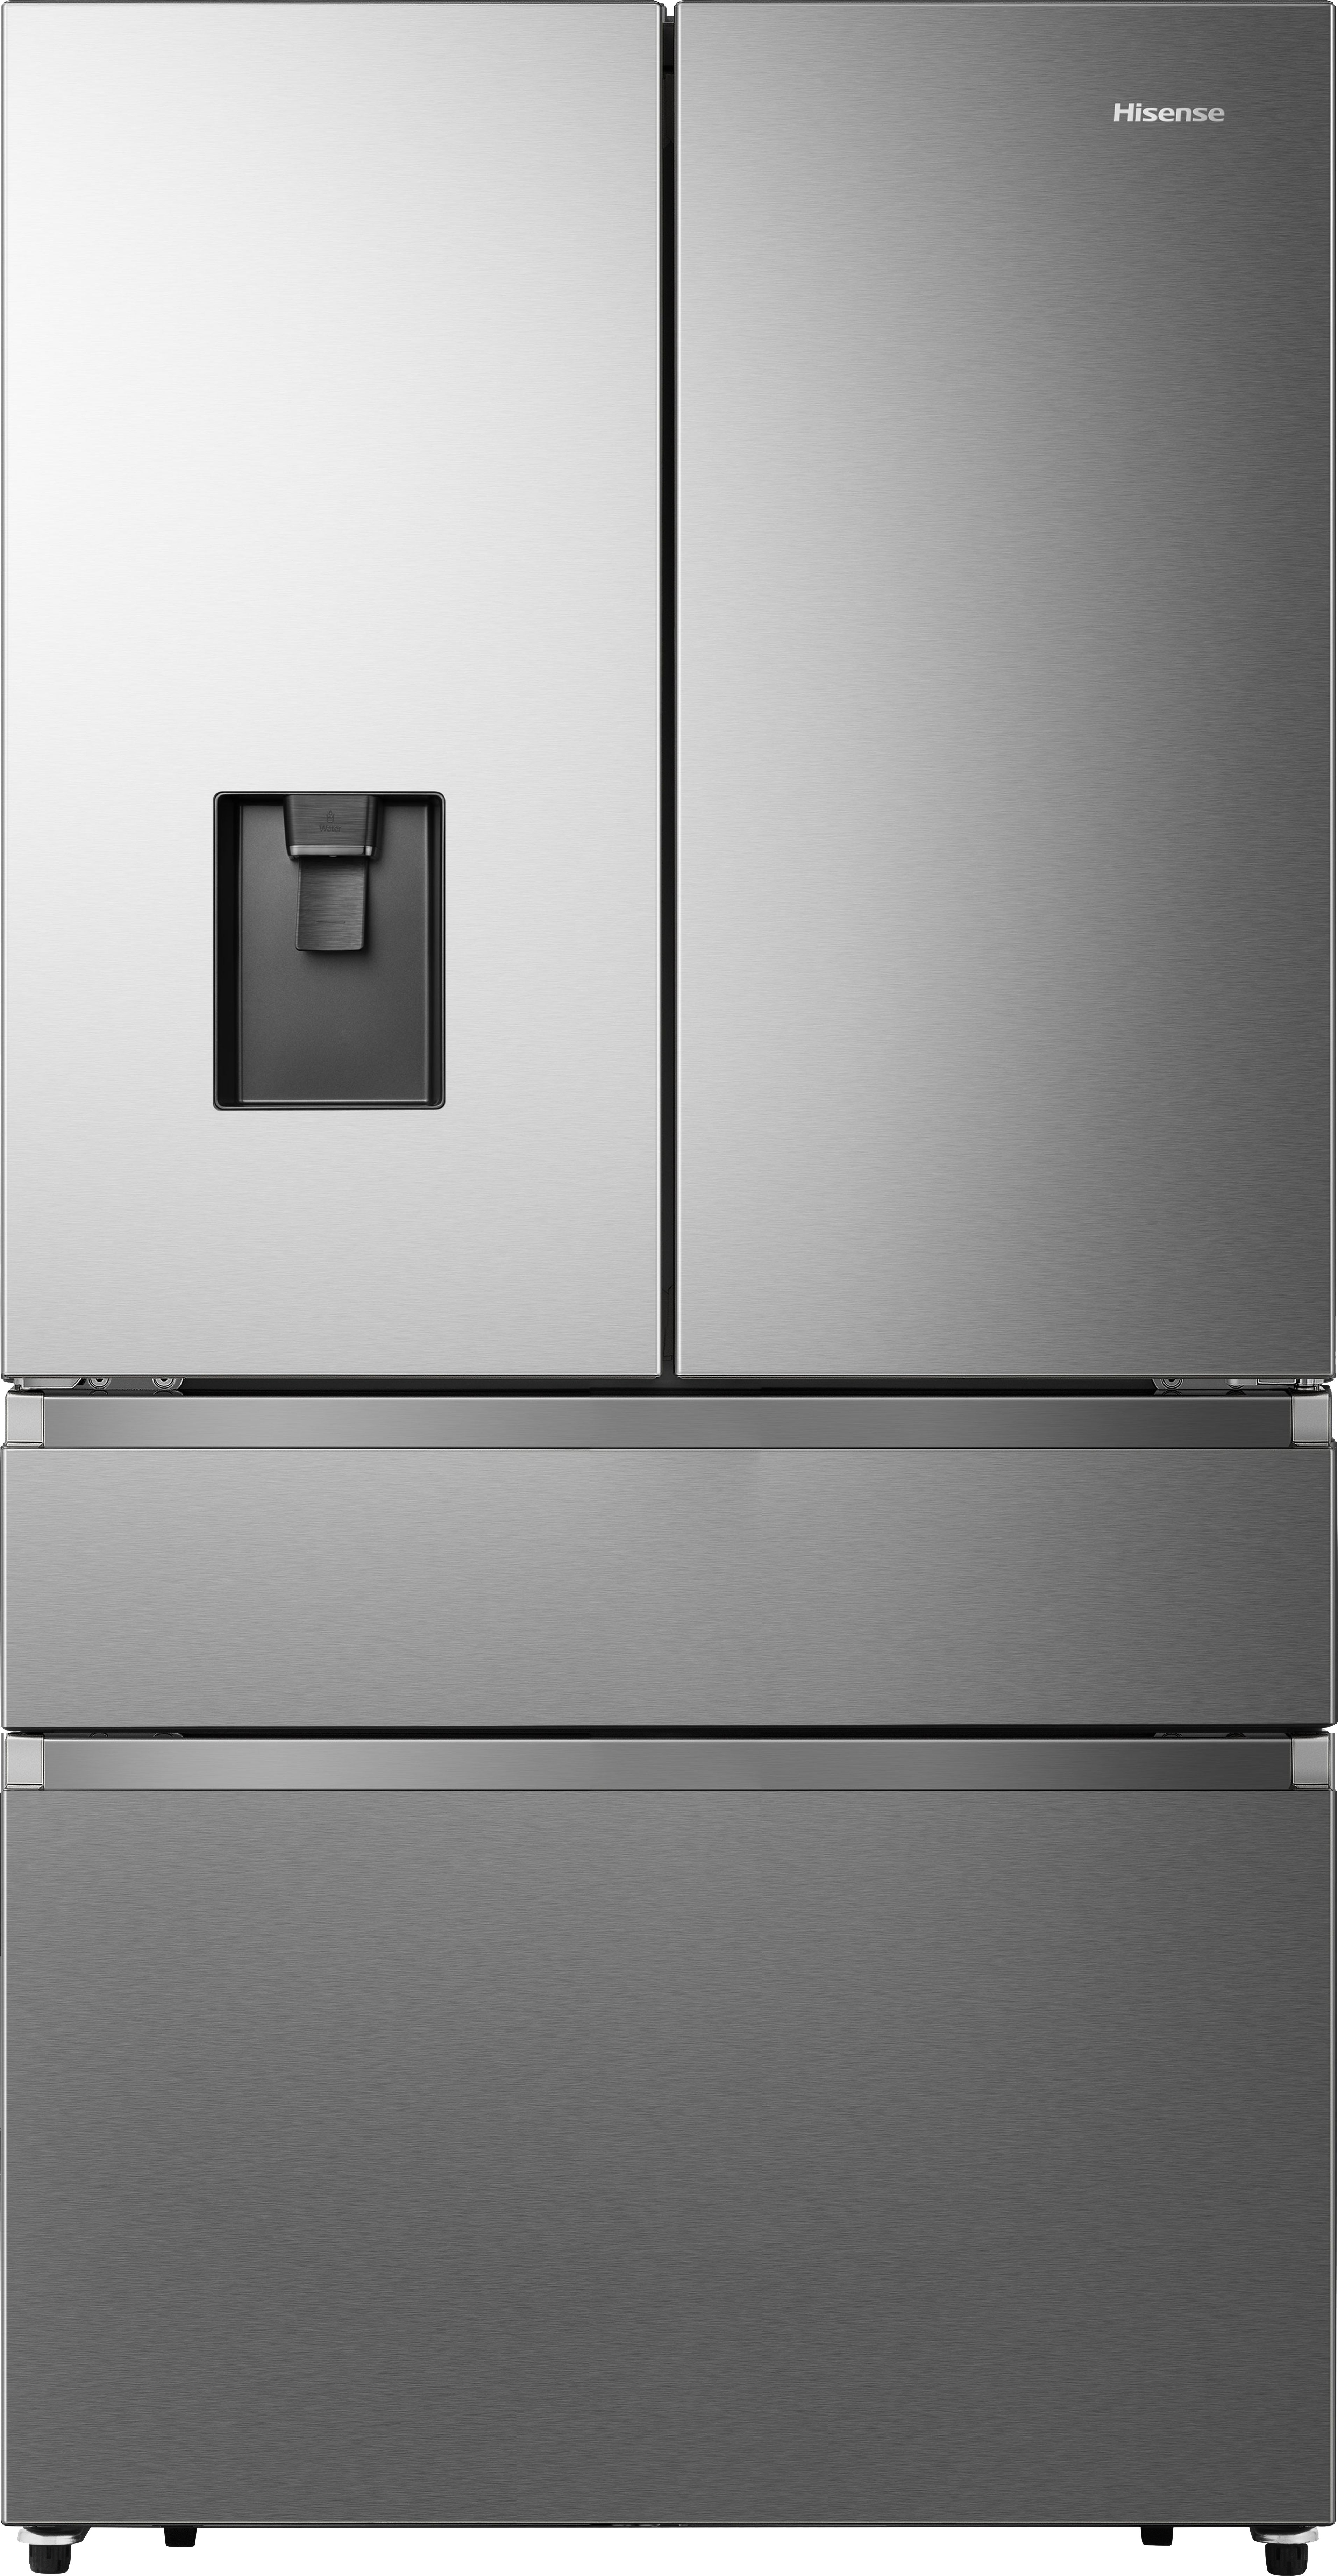 Hisense PureFlat RF749N4SWSE Non-Plumbed Total No Frost American Fridge Freezer - Stainless Steel - E Rated, Stainless Steel